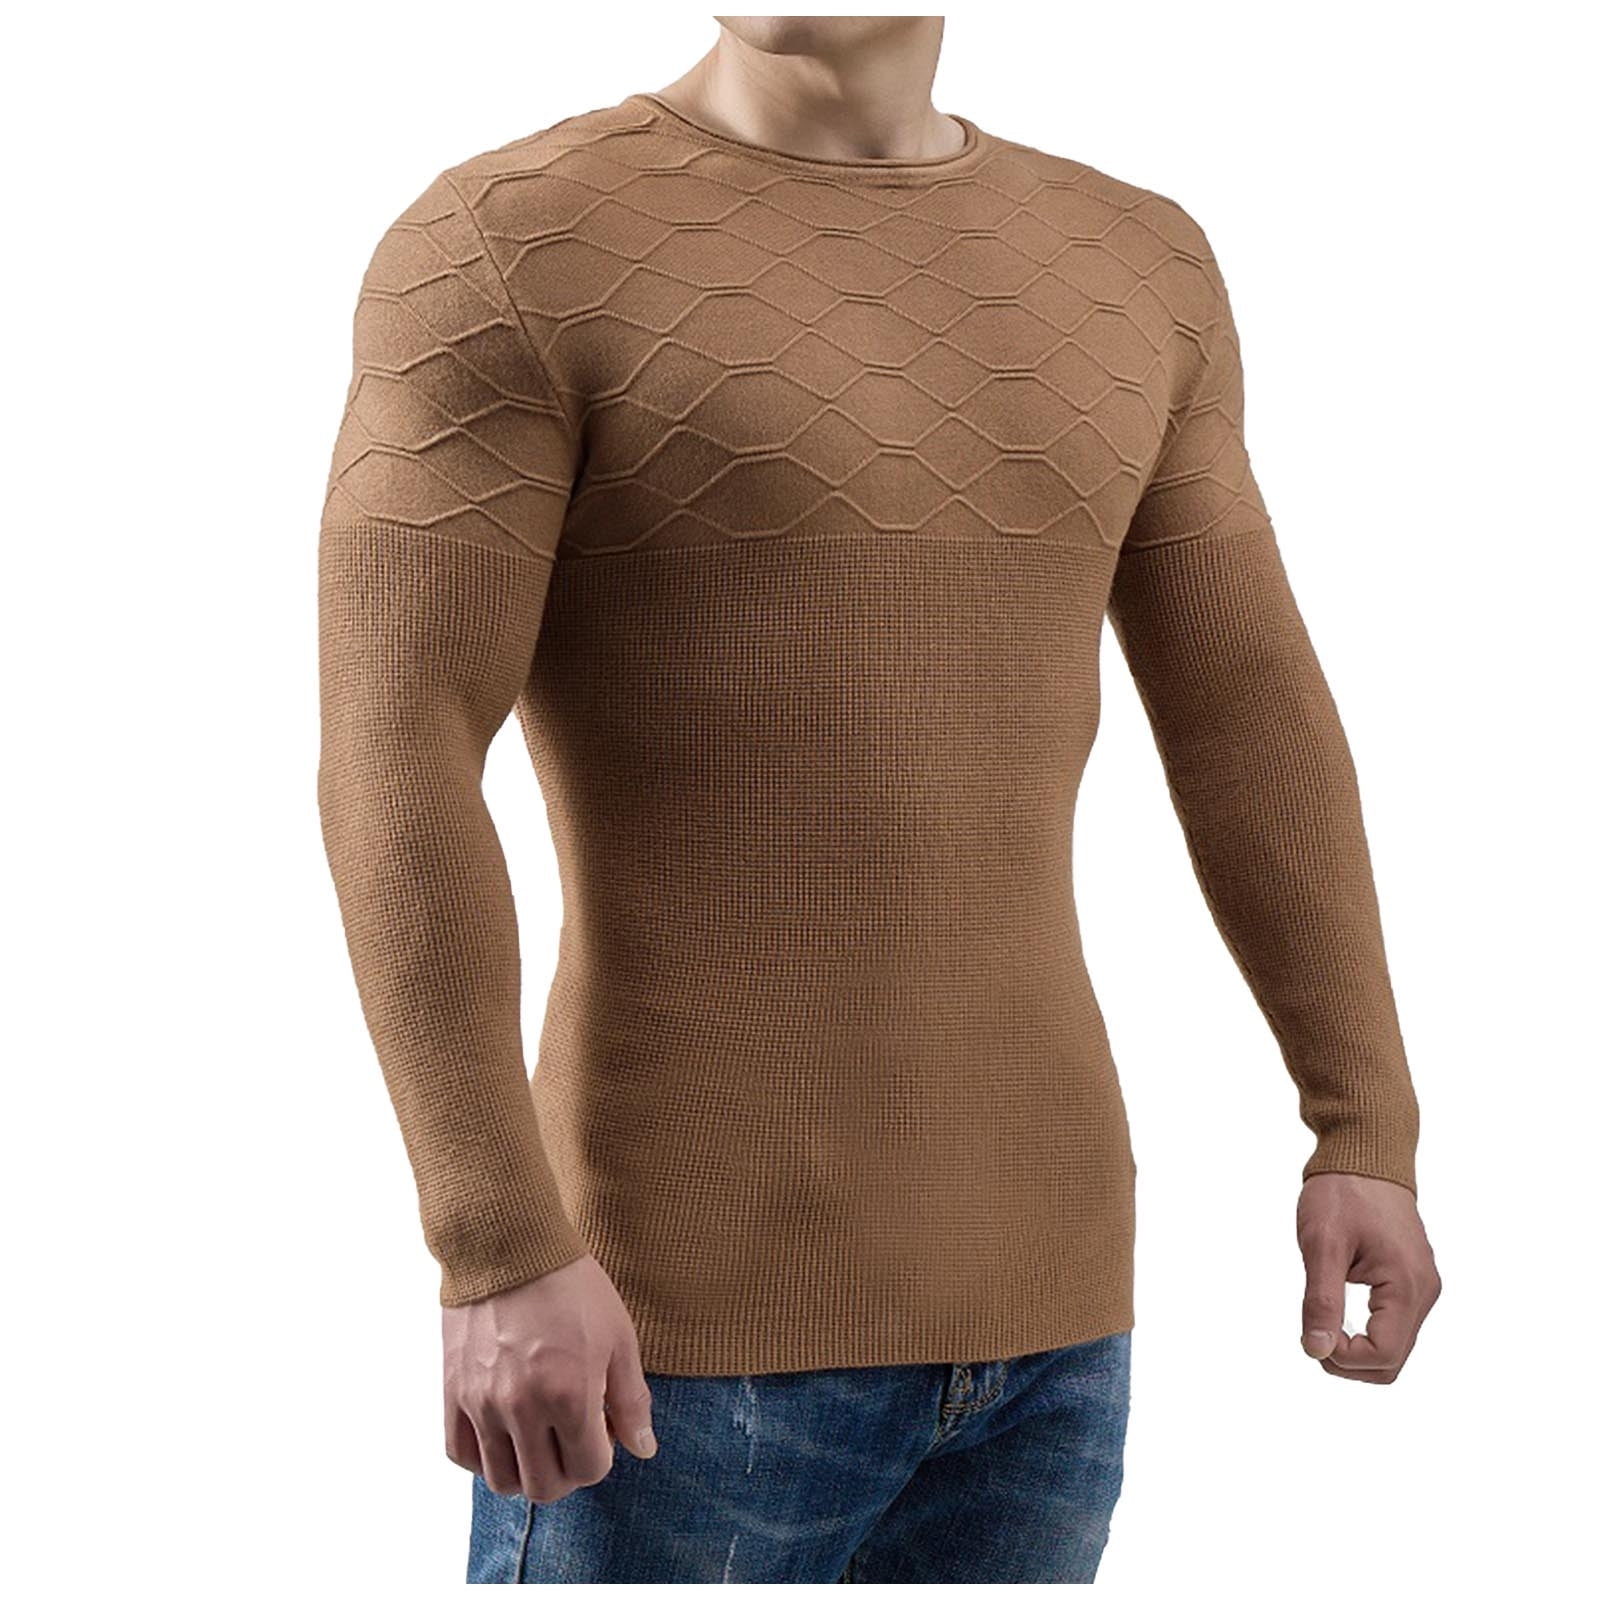 Men's Muscle Fit Compression Shirts Sweater Winter Warm Long Sleeve  Base-Layer Workout T Shirts Sports Running Tops 